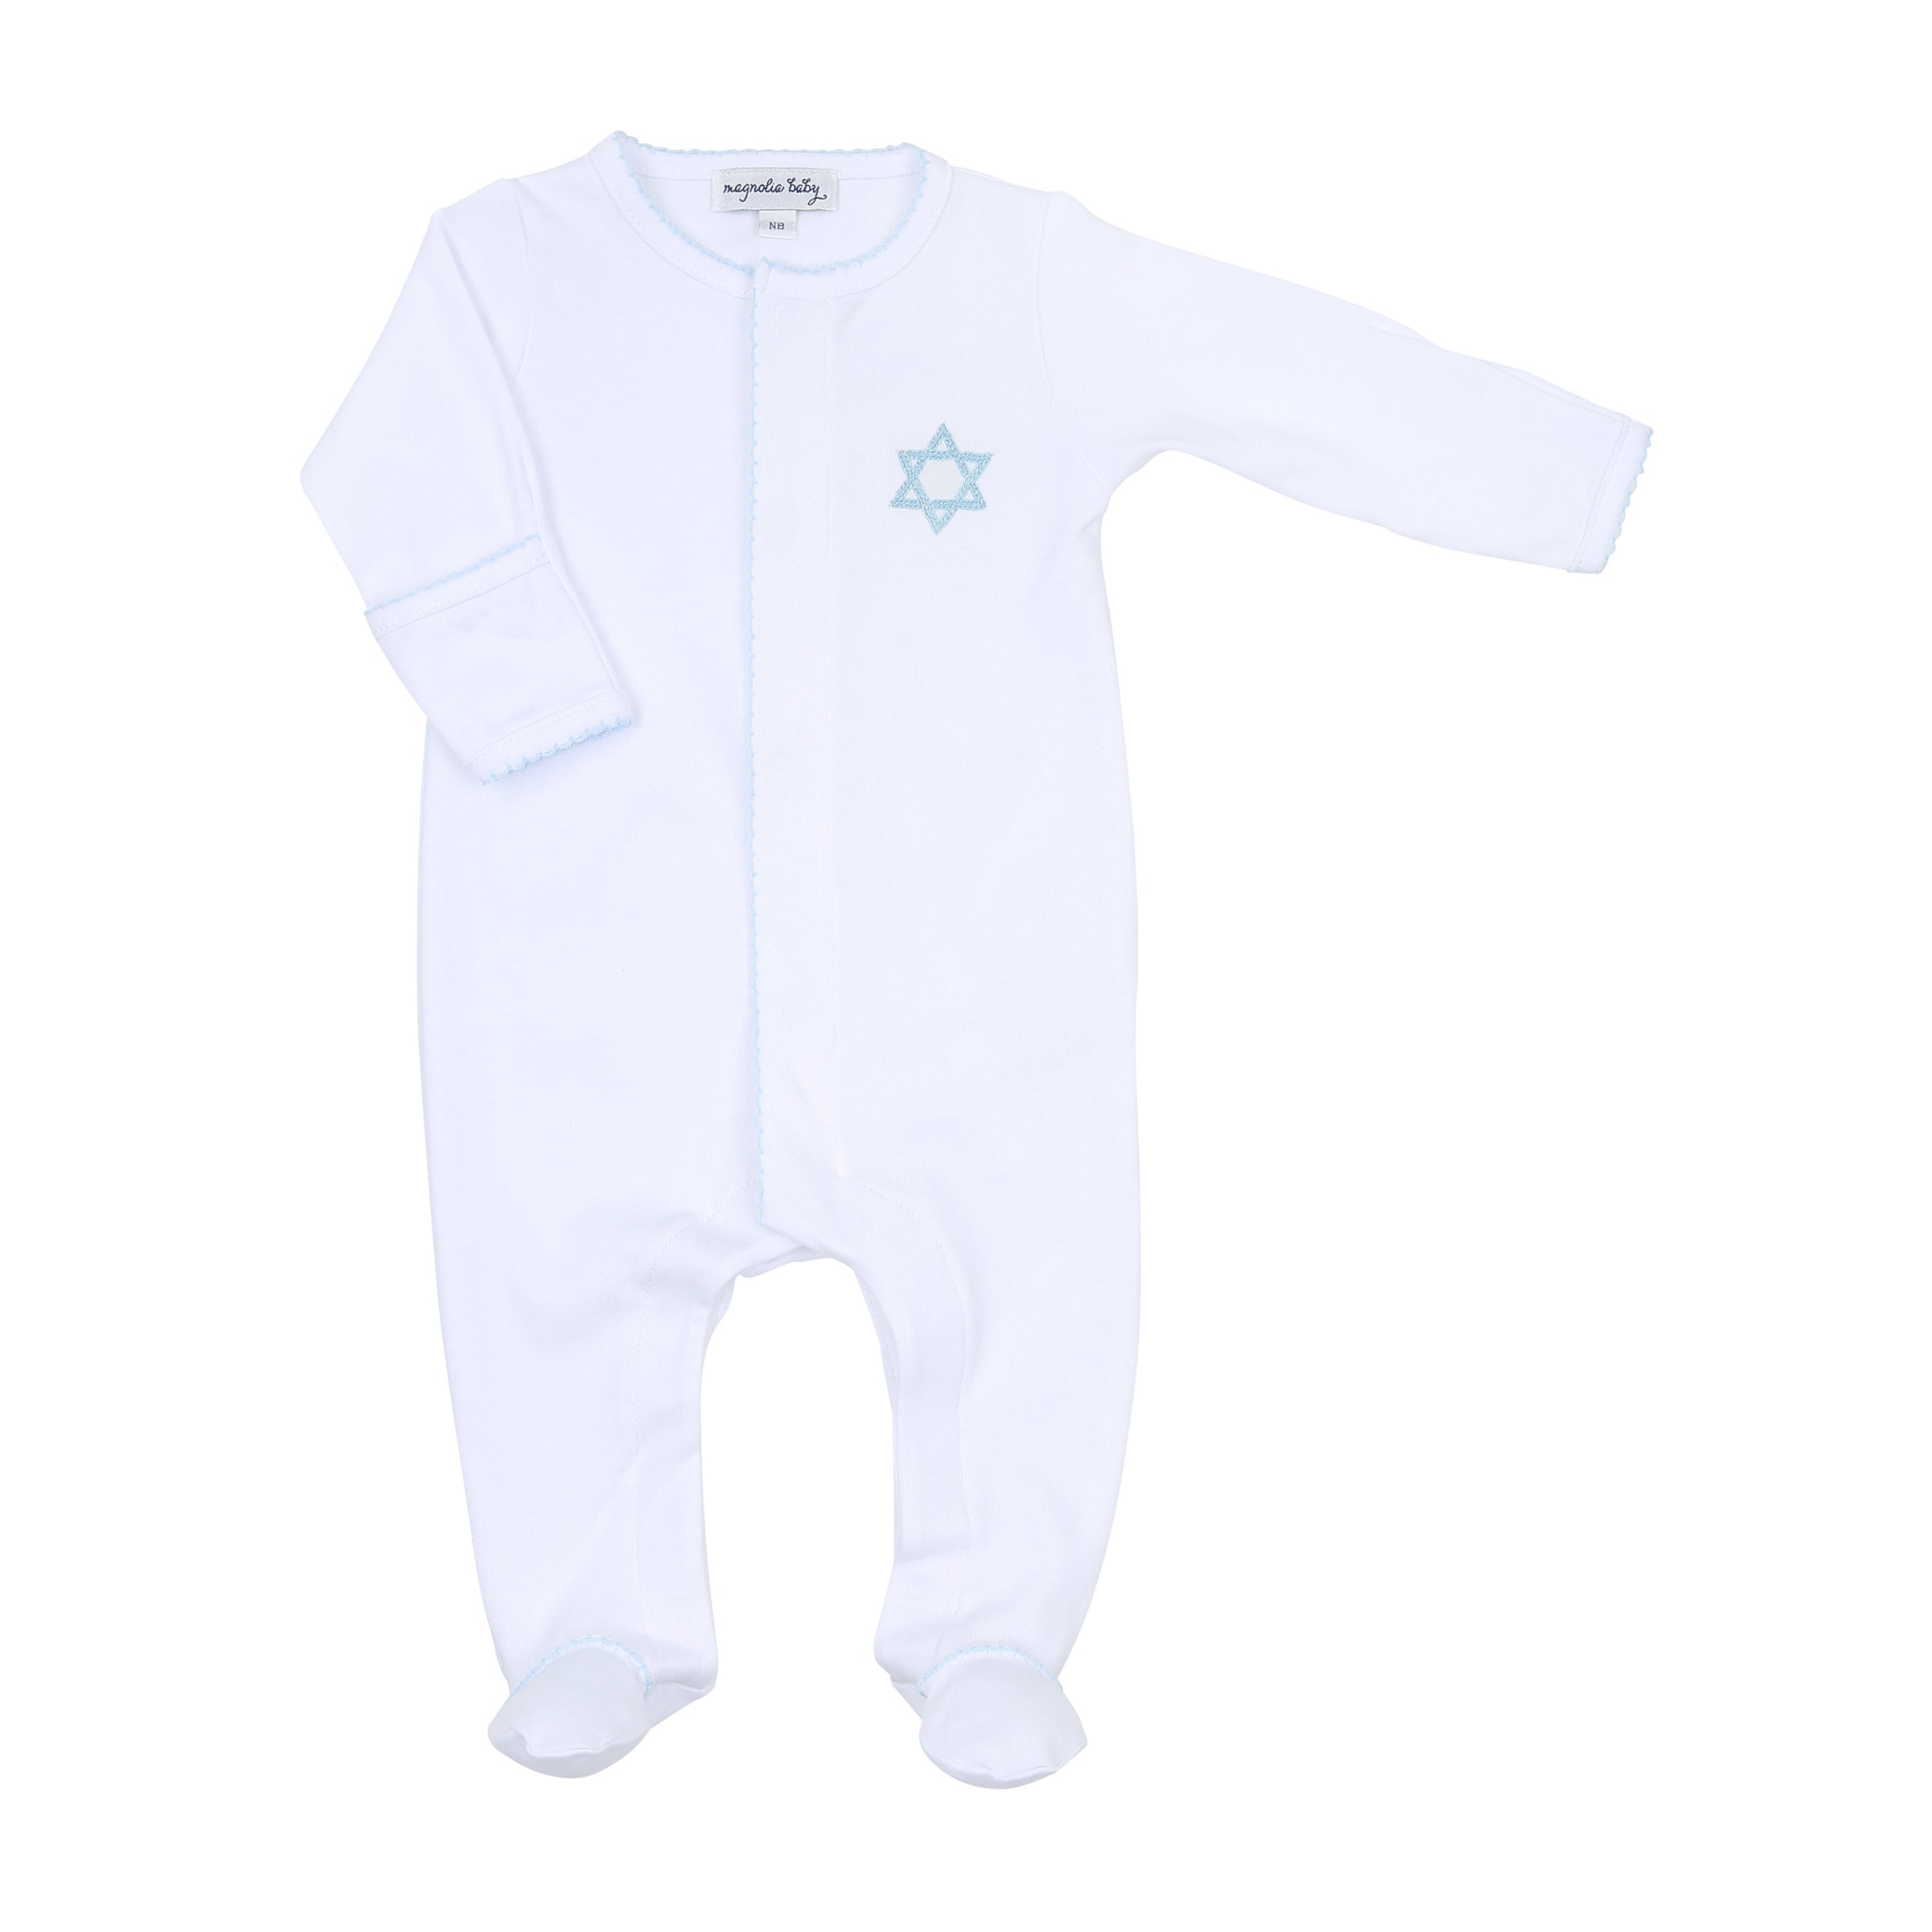 Brit Milah Embroidered Footie - Blue